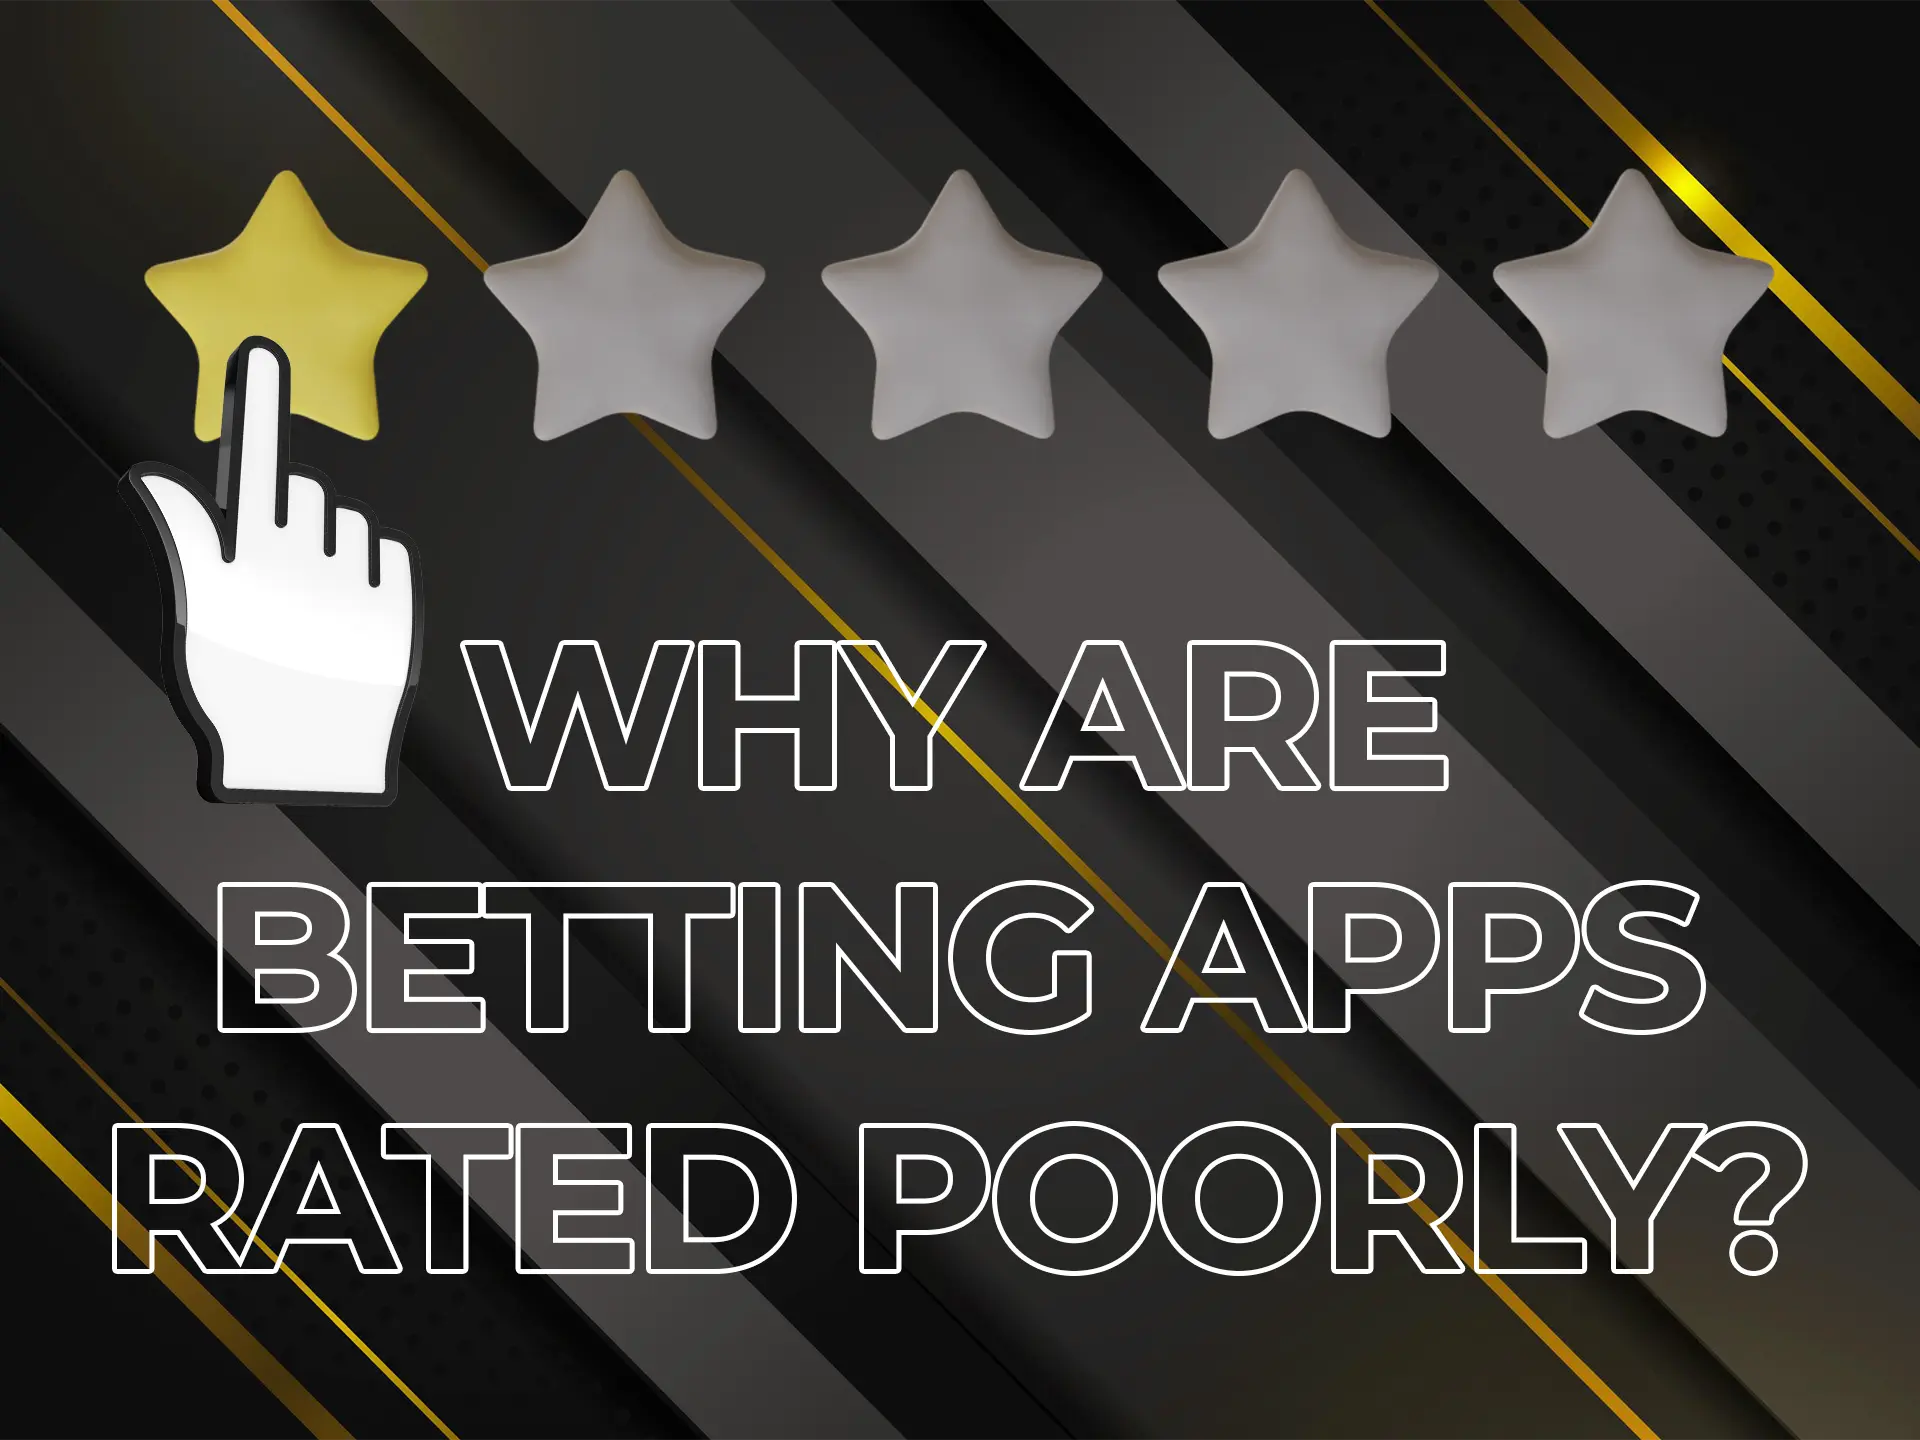 Be careful and read other users' reviews when choosing a football betting app.